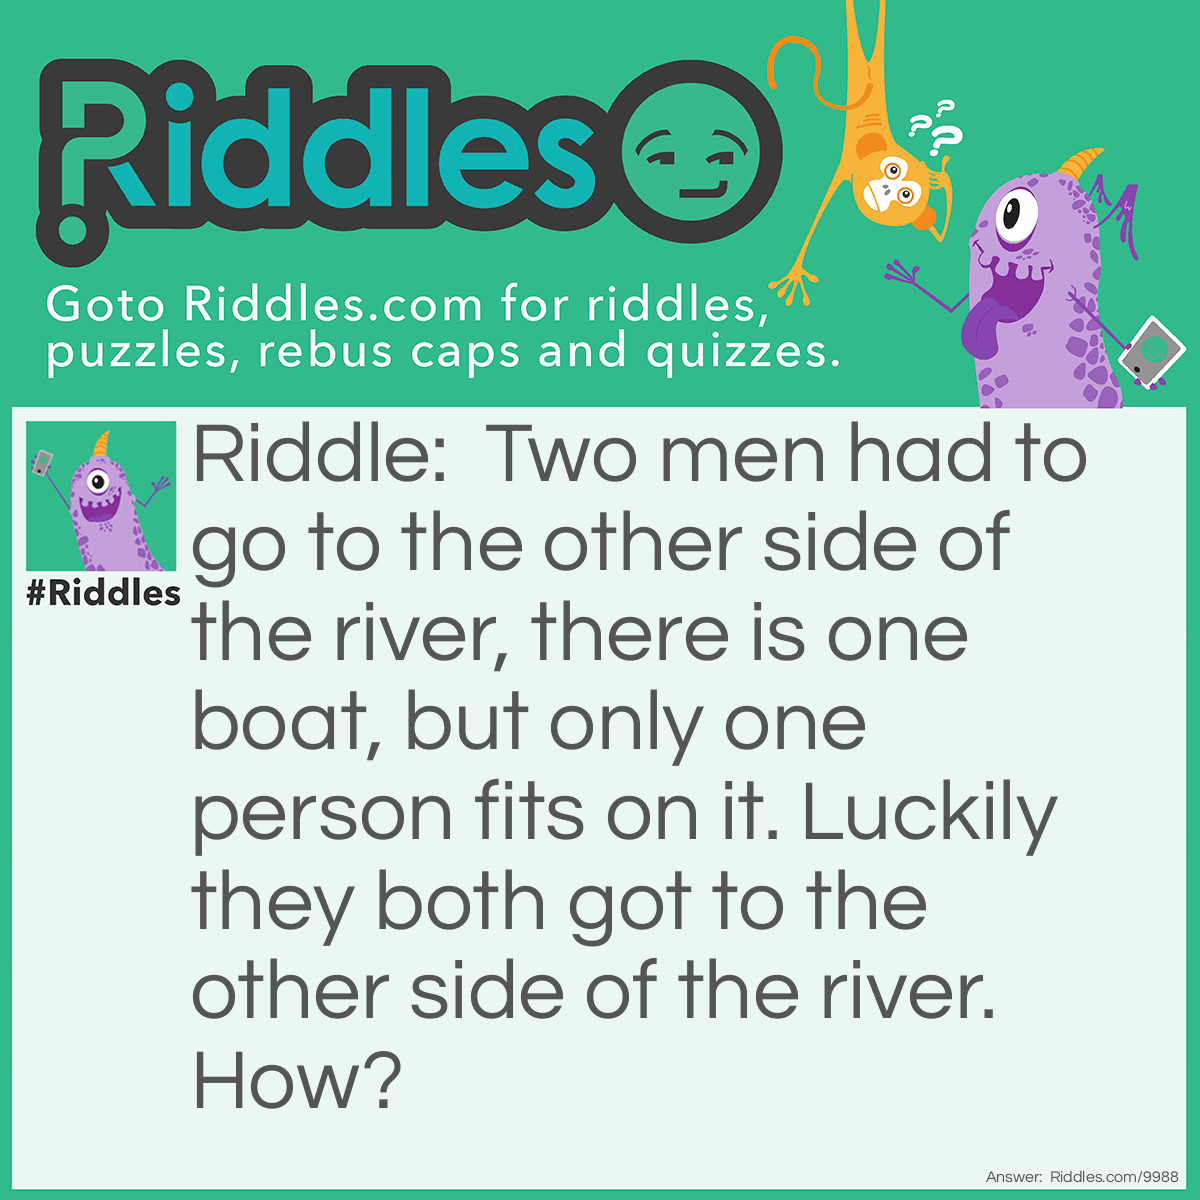 Riddle: Two men had to go to the other side of the river, there is one boat, but only one person fits on it. Luckily they both got to the other side of the river. How? Answer: They were on opposite sides of the river.